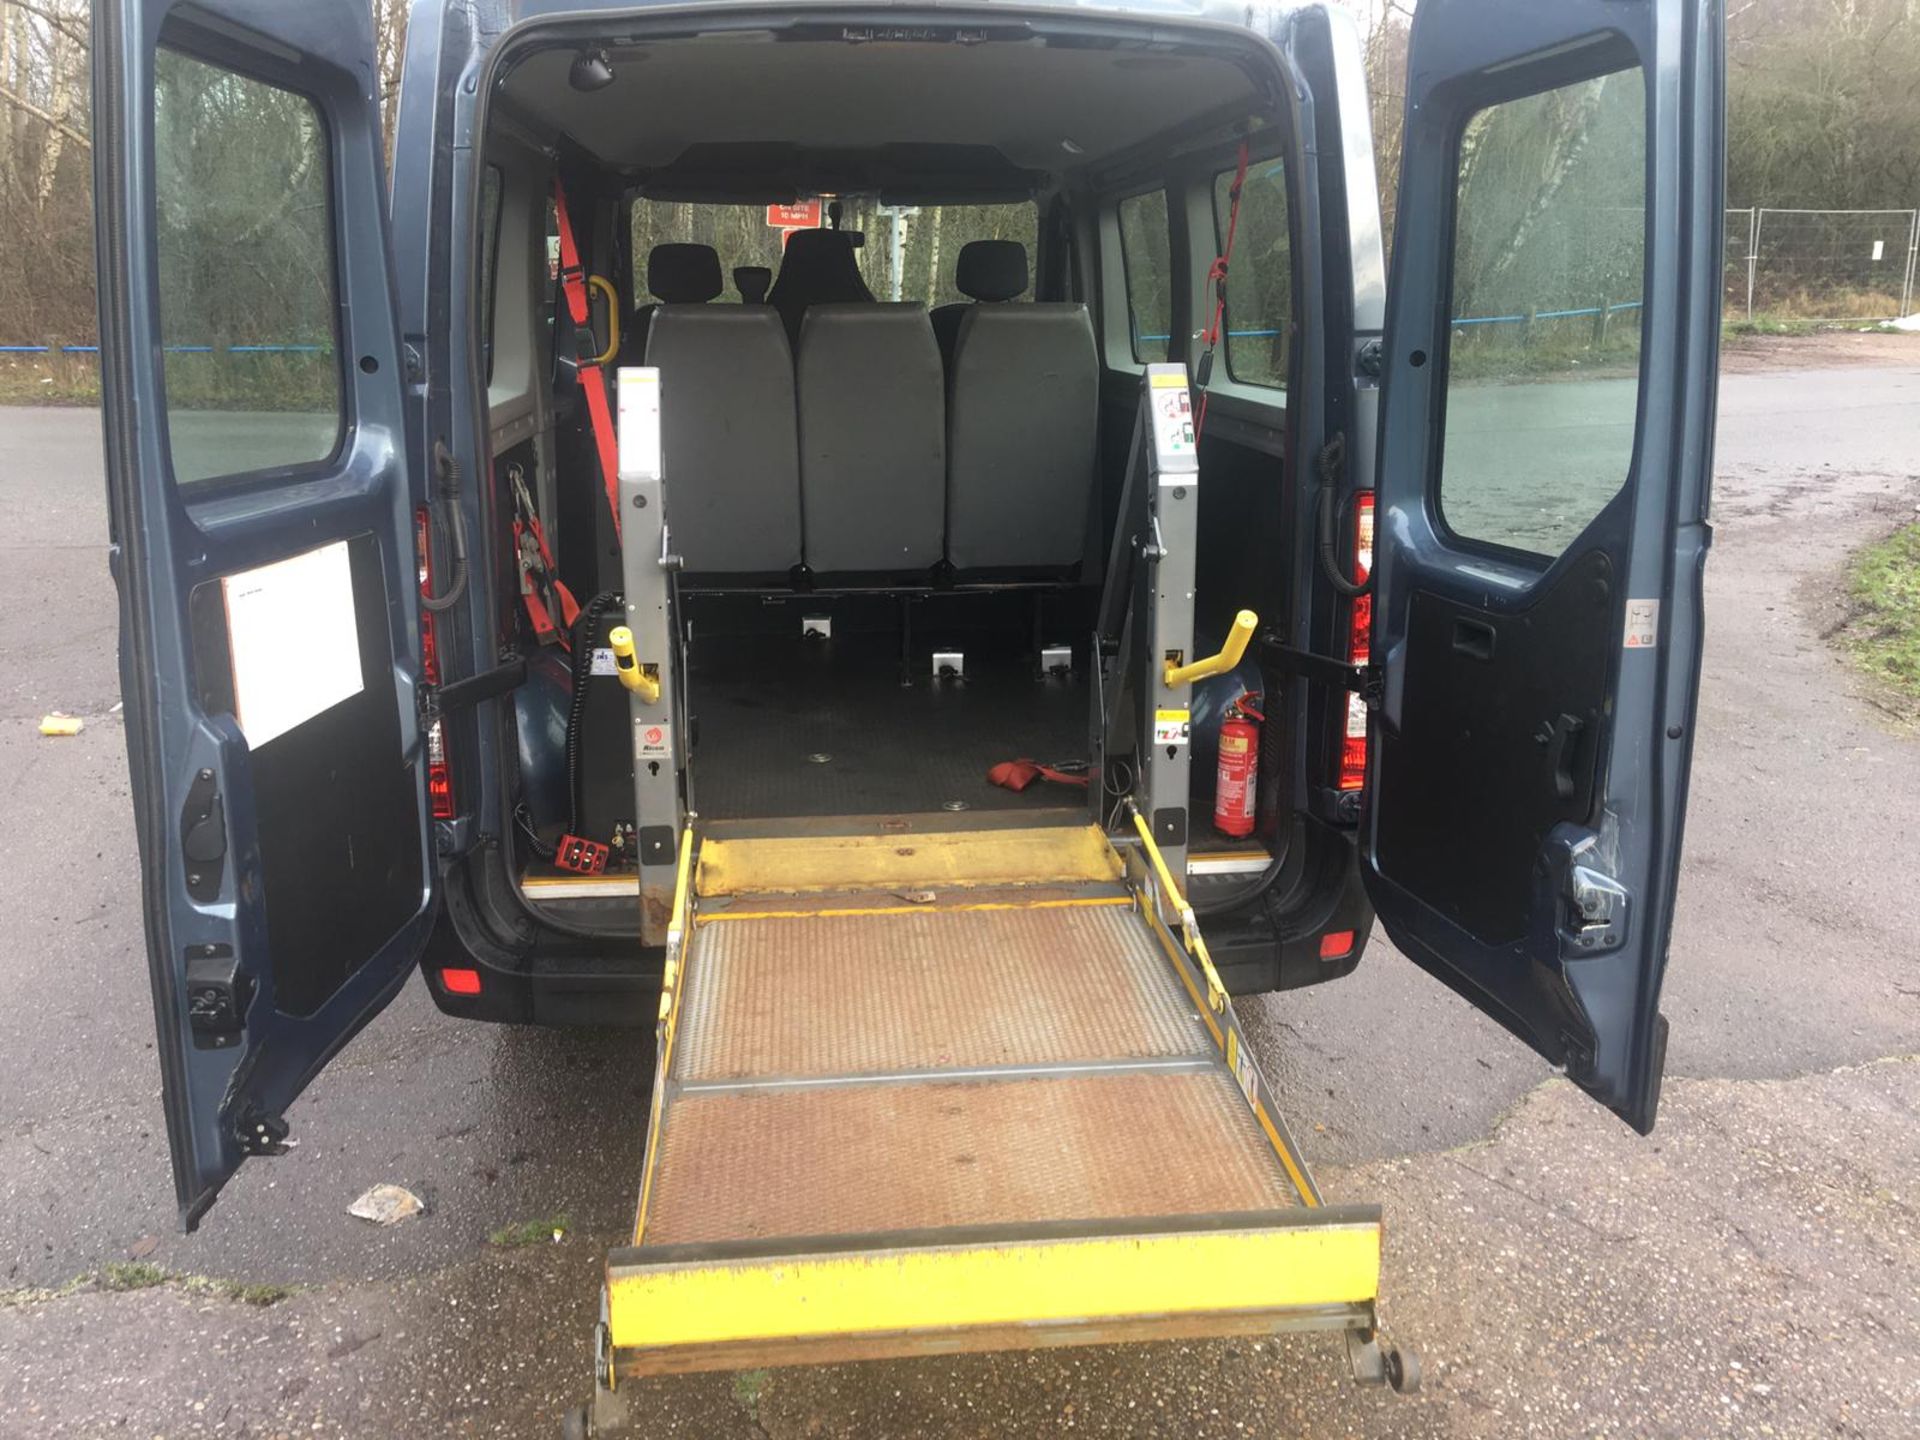 2013/63 REG RENAULT MASTER 2.3 DIESEL DISABLED ACCESS VEHICLE / MINIBUS, SHOWING 2 FORMER KEEPERS - Image 10 of 33